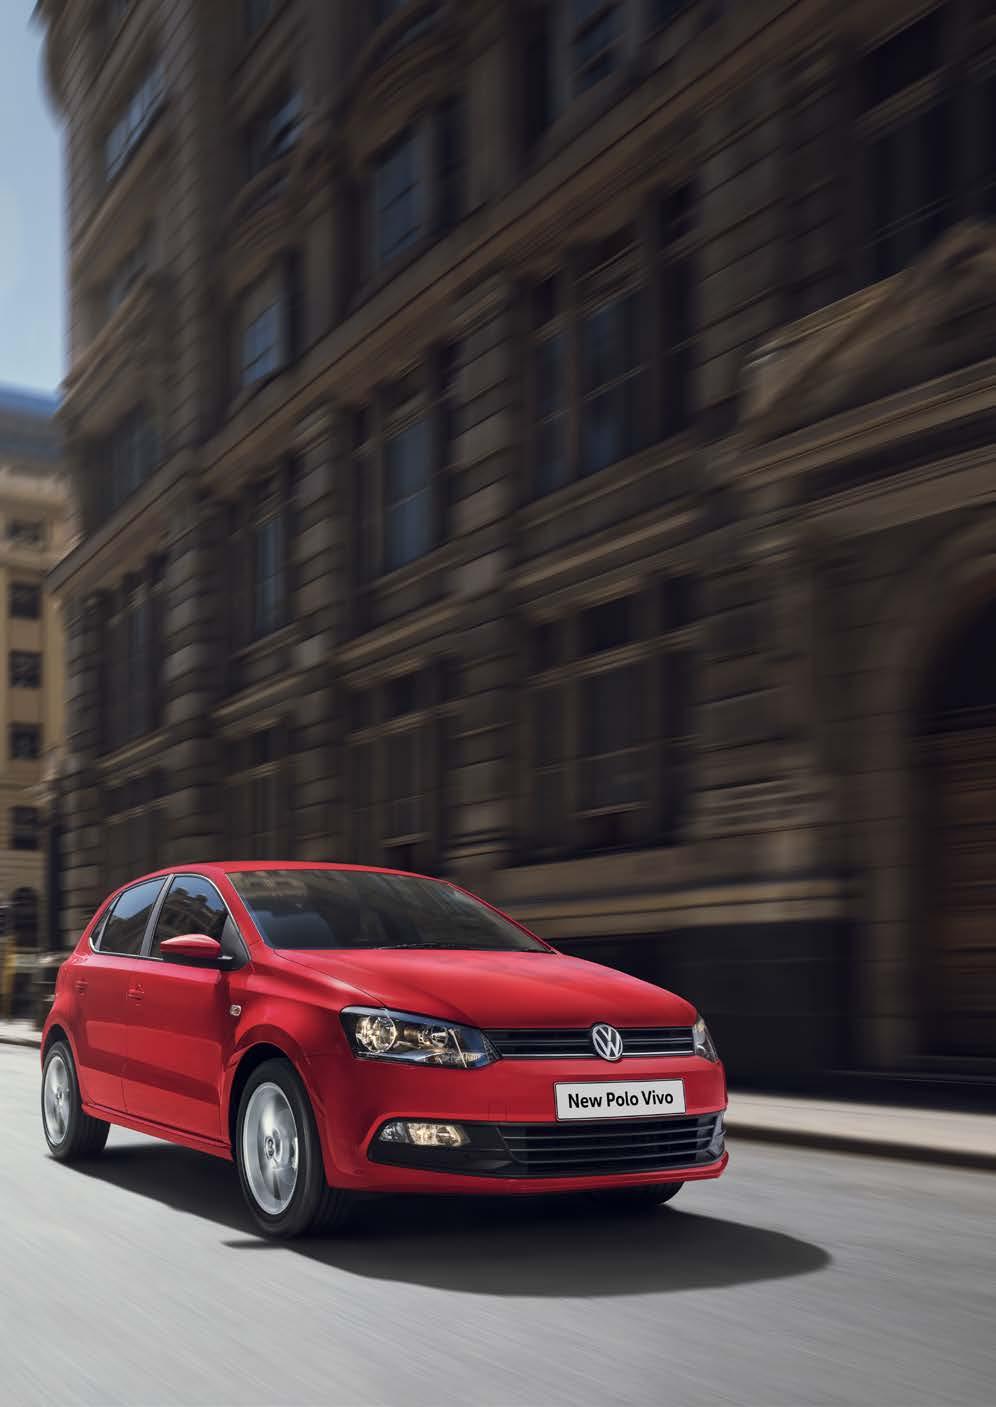 Style comes standard. The new Polo Vivo looks as smooth as it drives. With its smart design and handy features, it s no wonder it grabs attention.